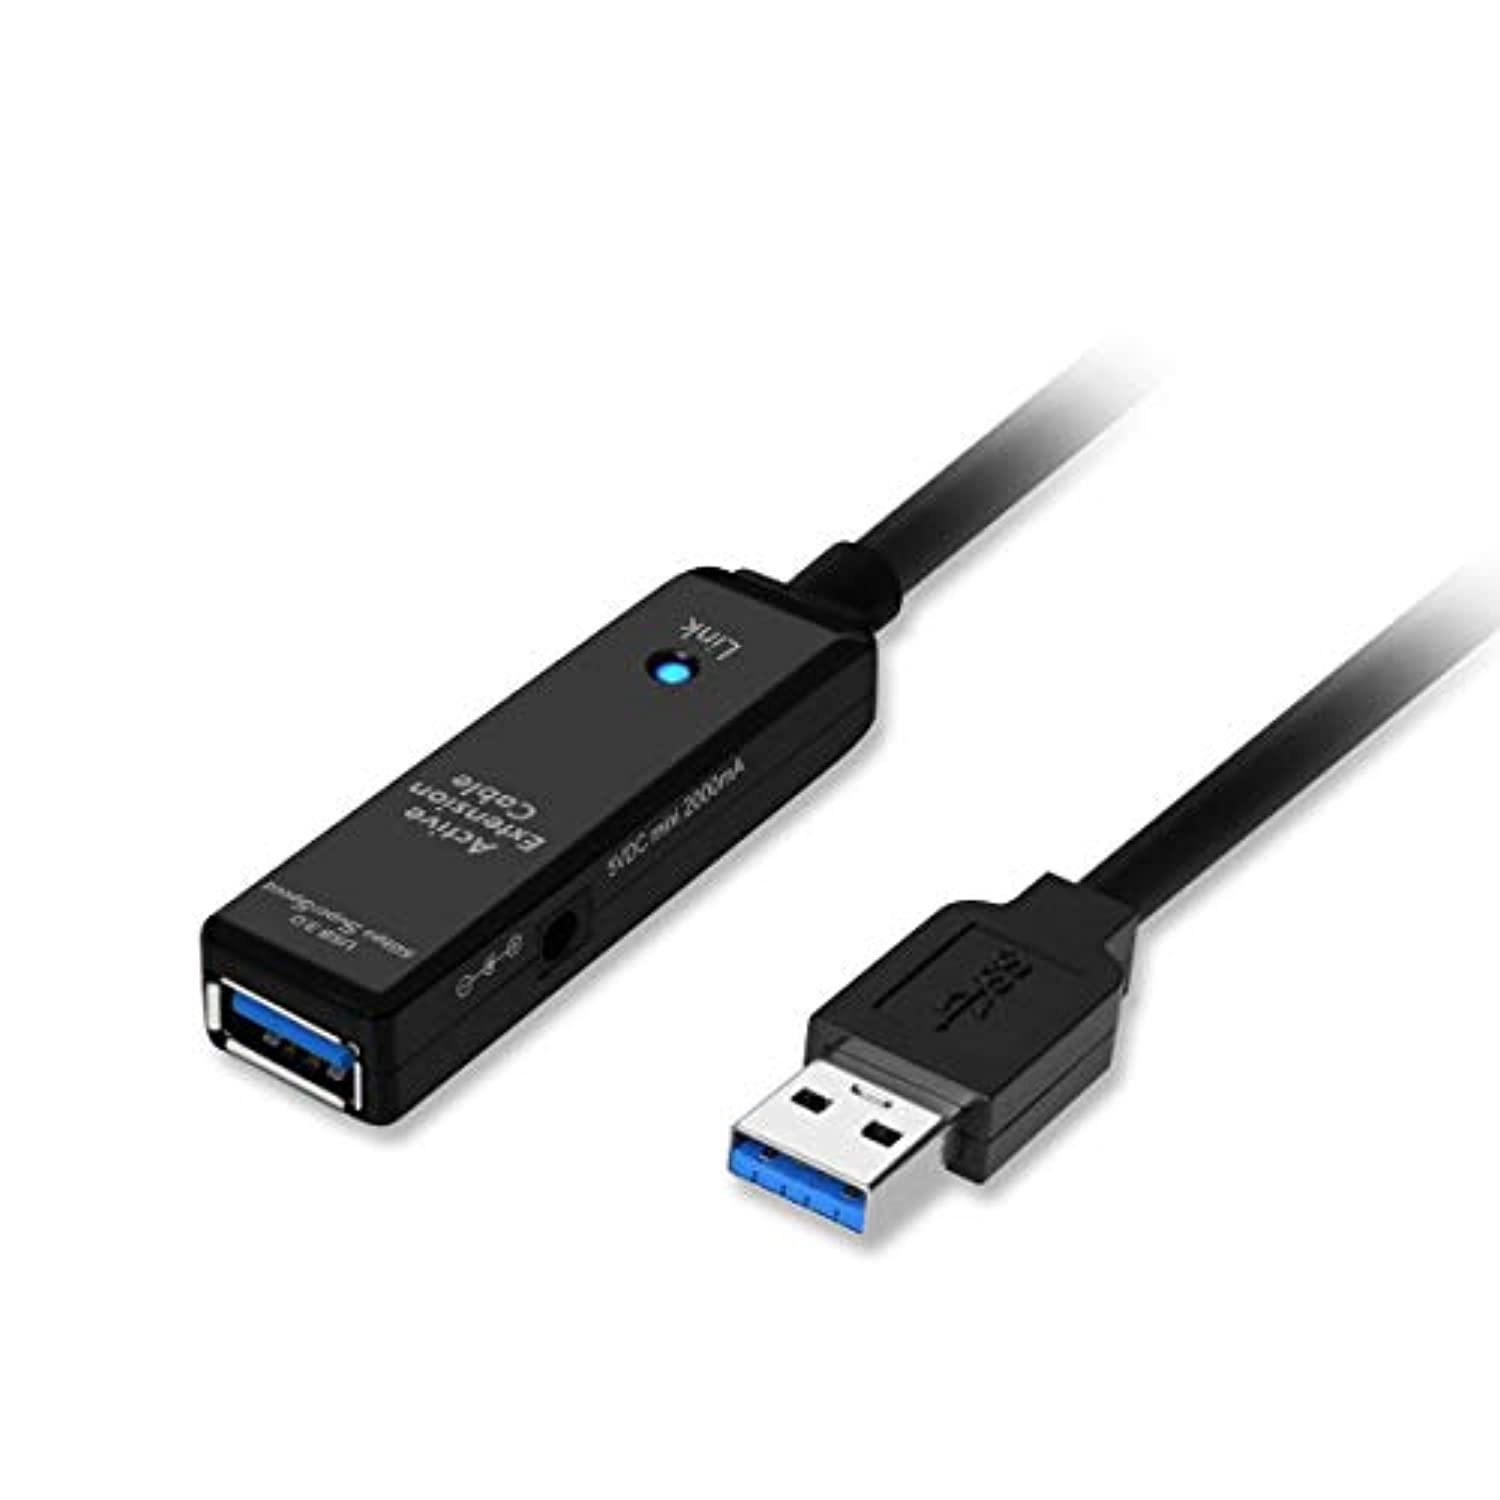 siig usb 3.0 active repeater cable 25-meters - active extension cable (ju-cb0d11-s1)